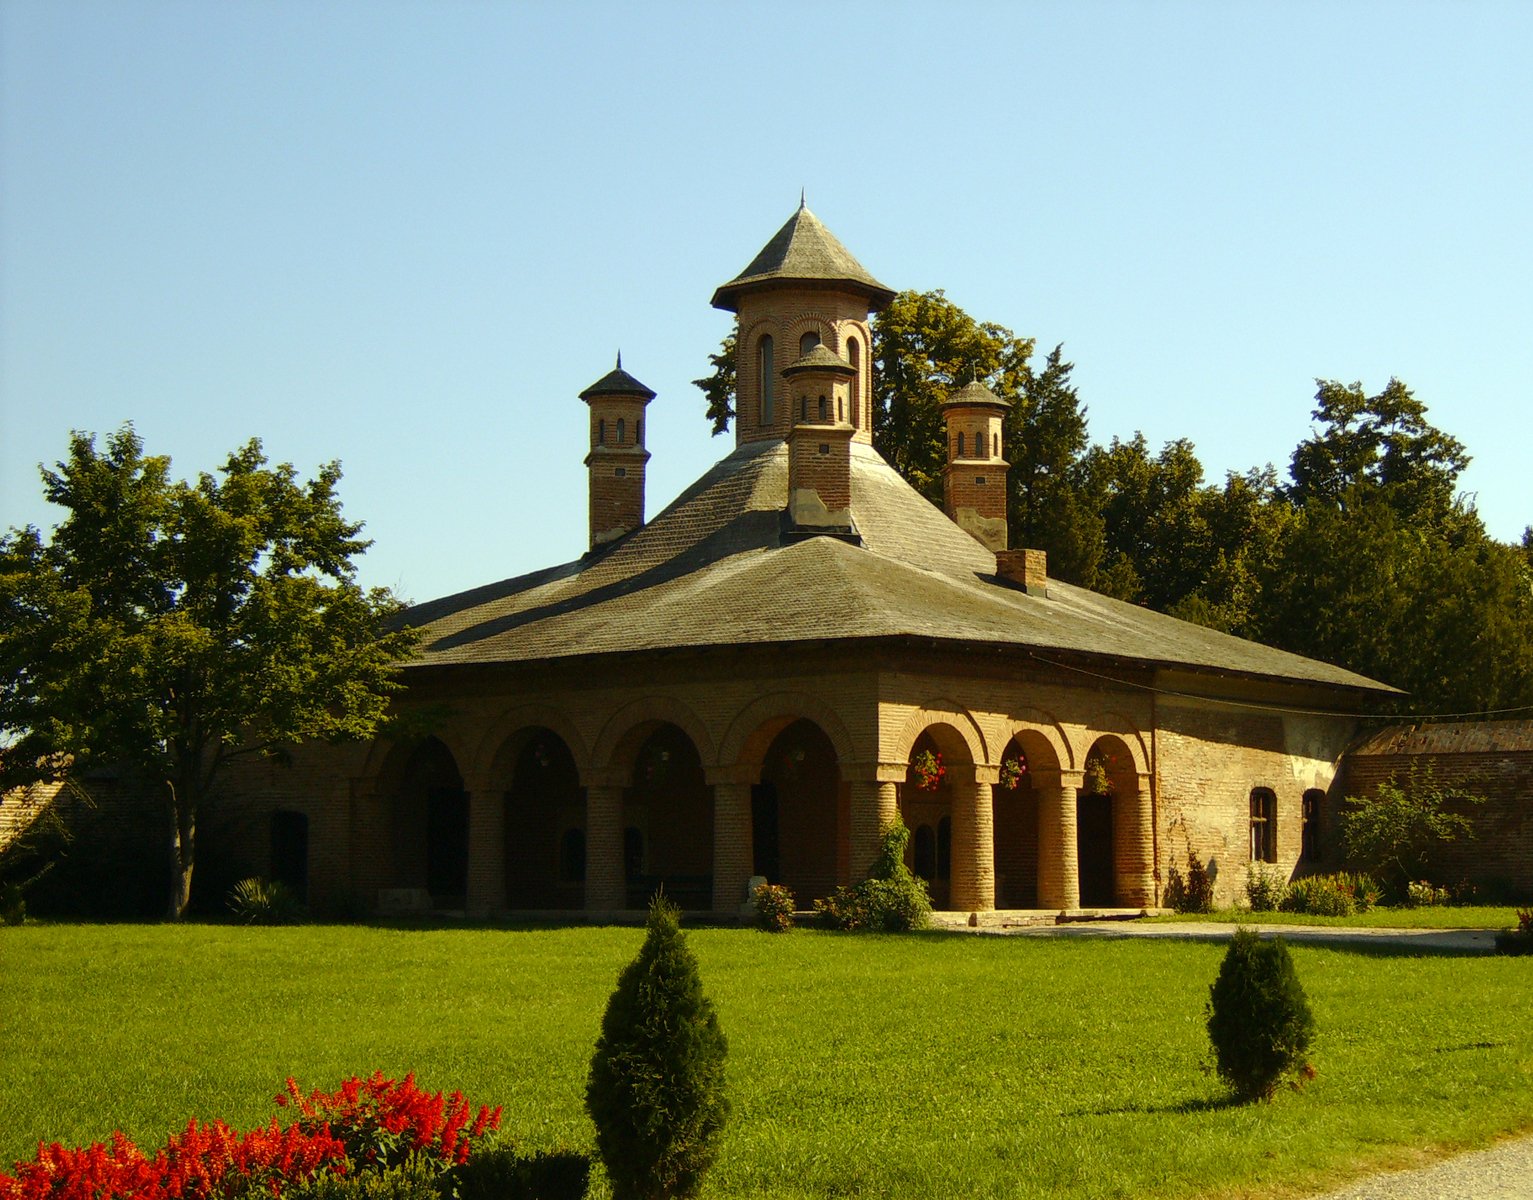 the front view of a large building in a park